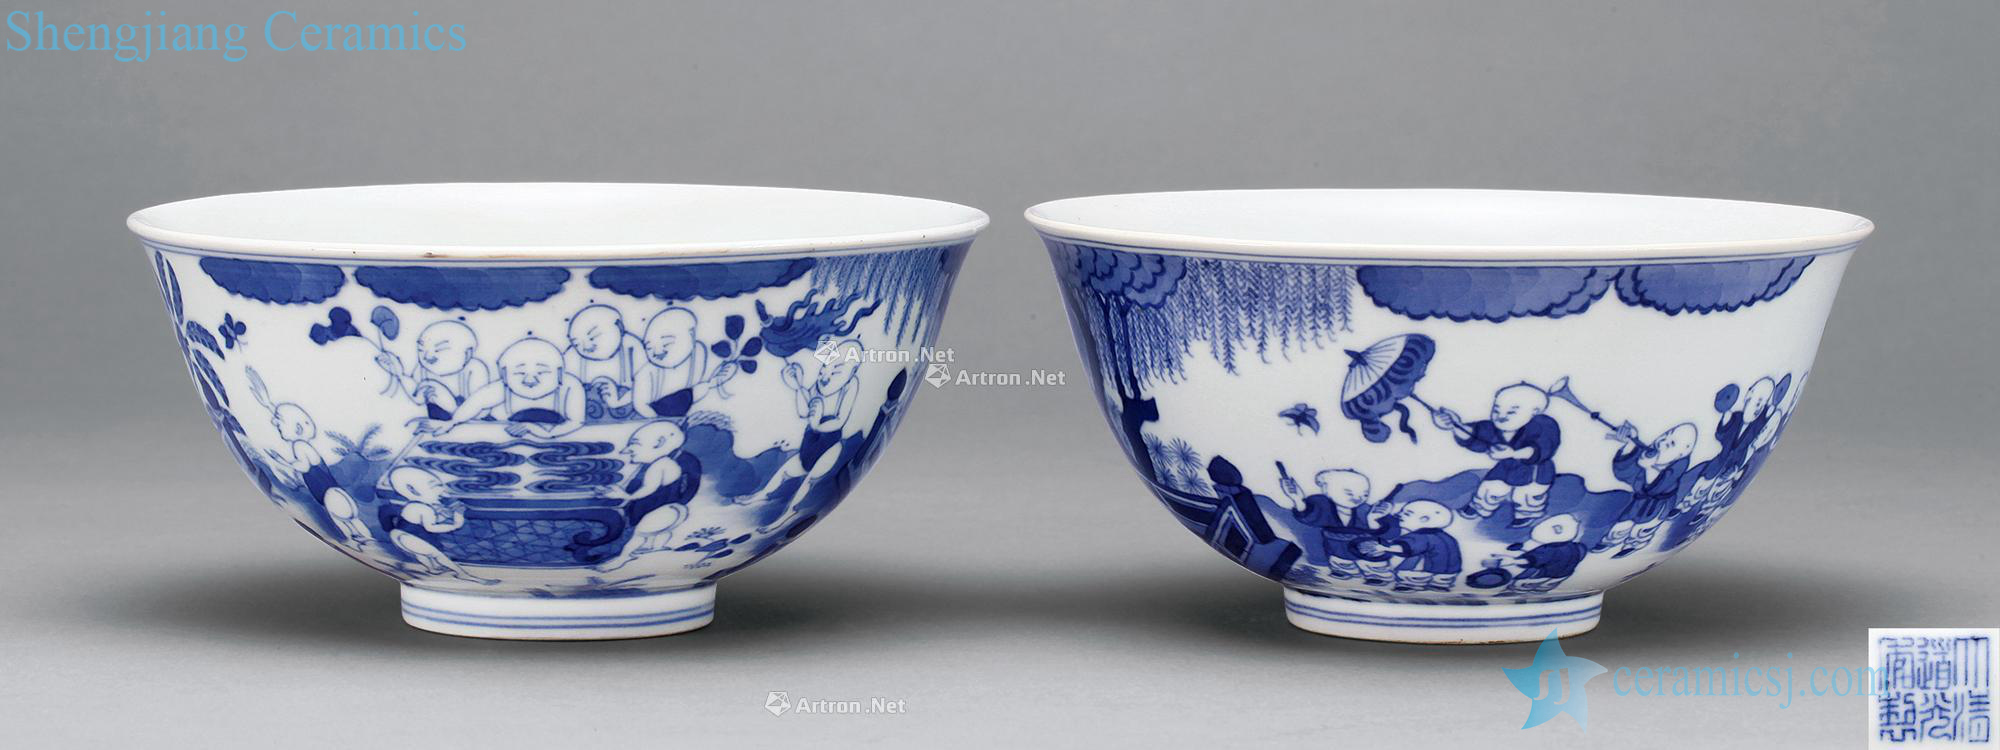 Qing daoguang Blue and white baby play figure bowl (2)